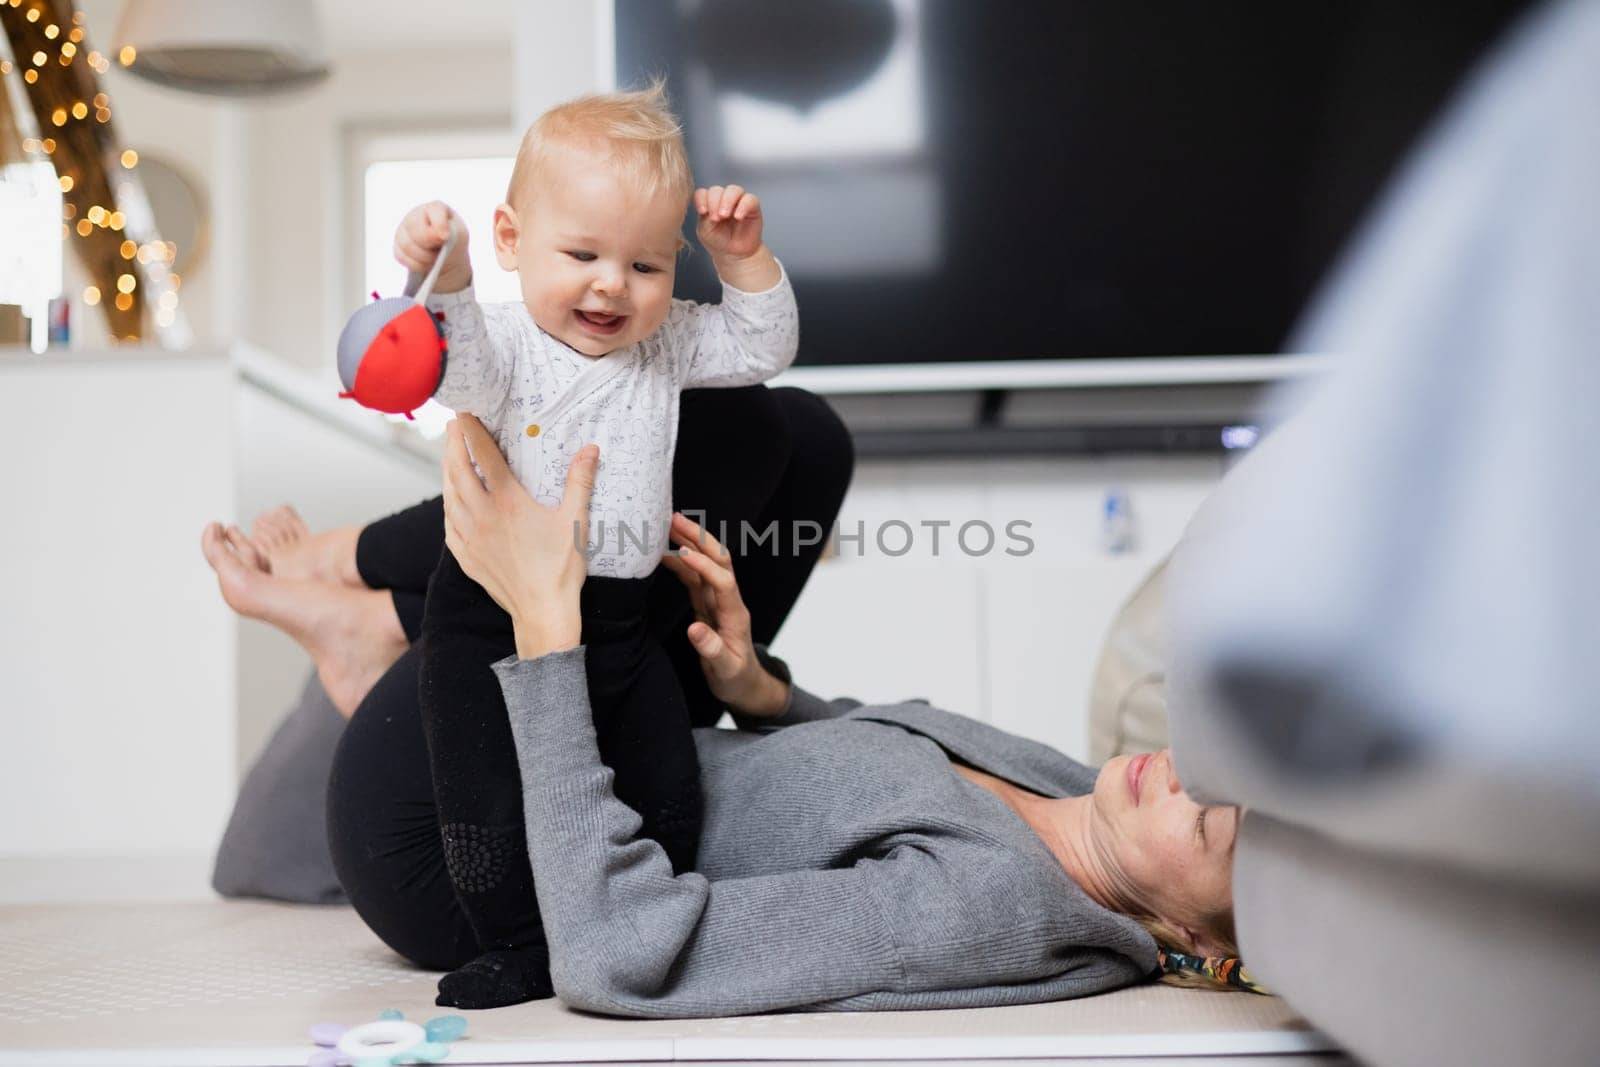 Happy family moments. Mother lying comfortably on children's mat playing with her baby boy watching and suppervising his first steps. Positive human emotions, feelings, joy